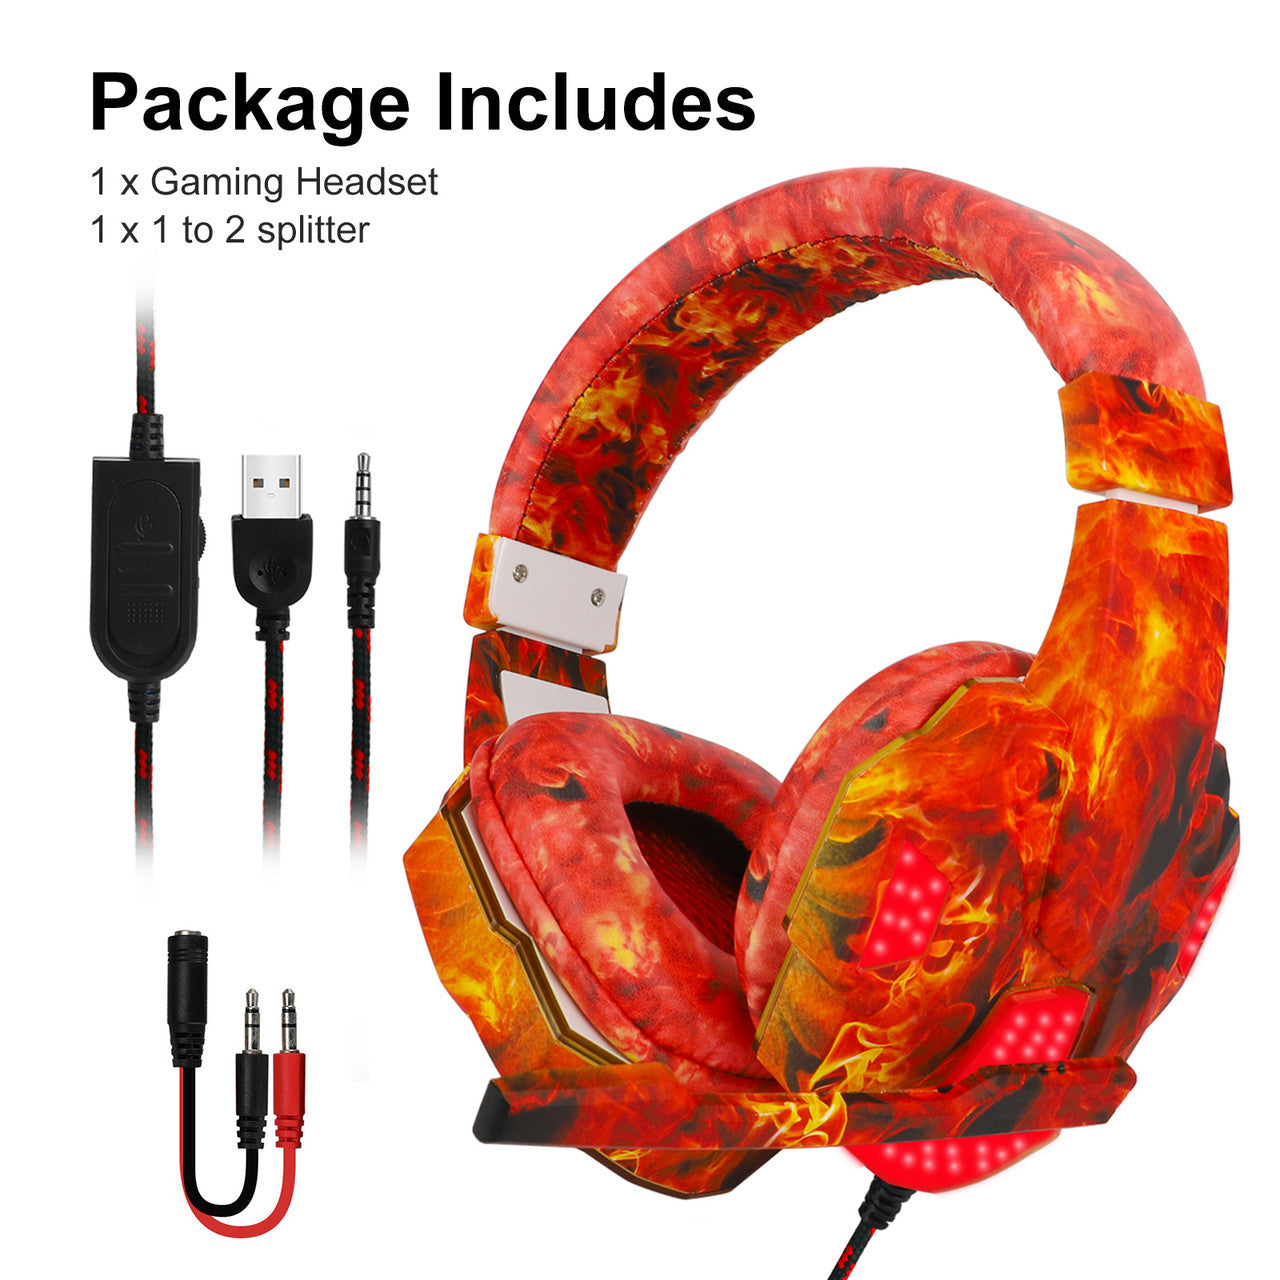 Wired Gaming Headset 3.5MM Headphone Jack - For Game, PC, Controller with Mic, Surround Sound, Soft Earmuffs (Red)